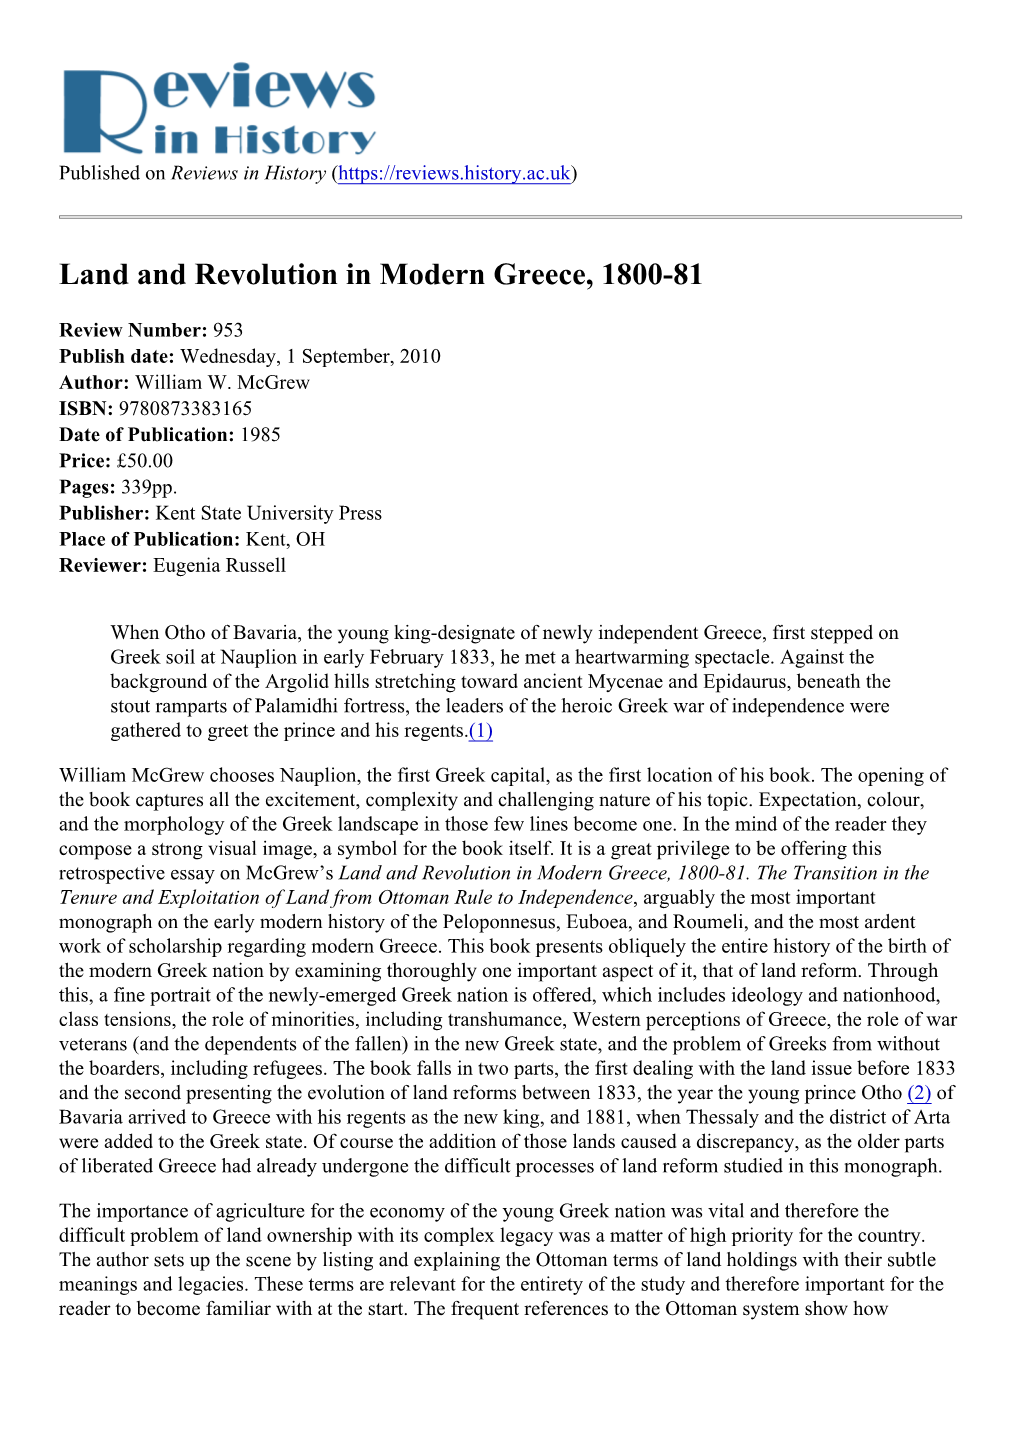 Land and Revolution in Modern Greece, 1800-81